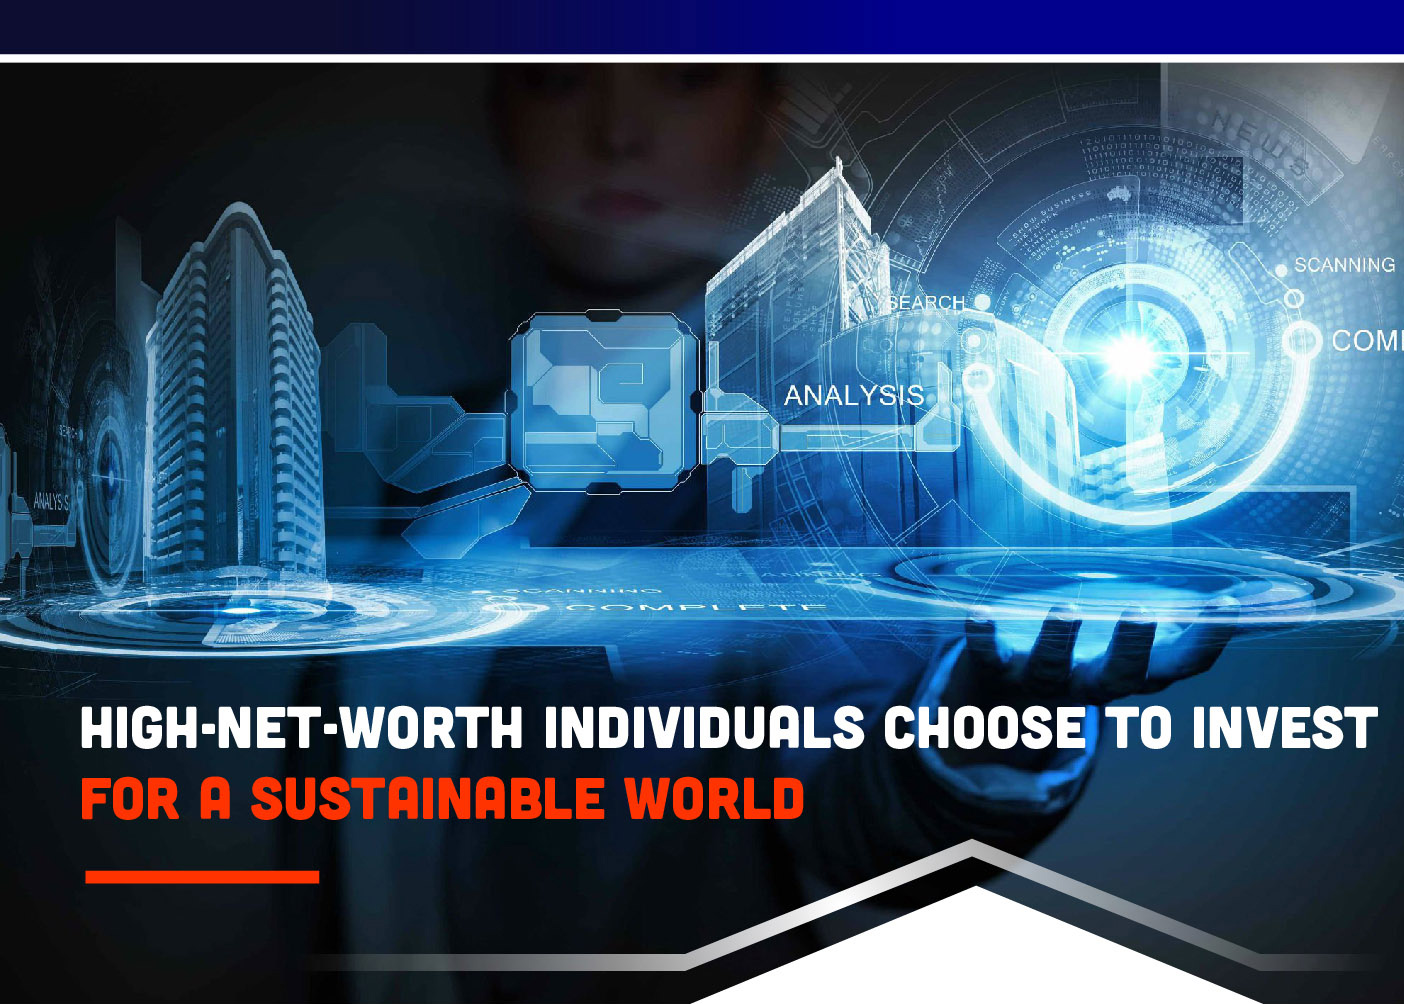 HIGH-NET-WORTH INDIVIDUALS CHOOSE TO INVEST  FOR A SUSTAINABLE WORLD